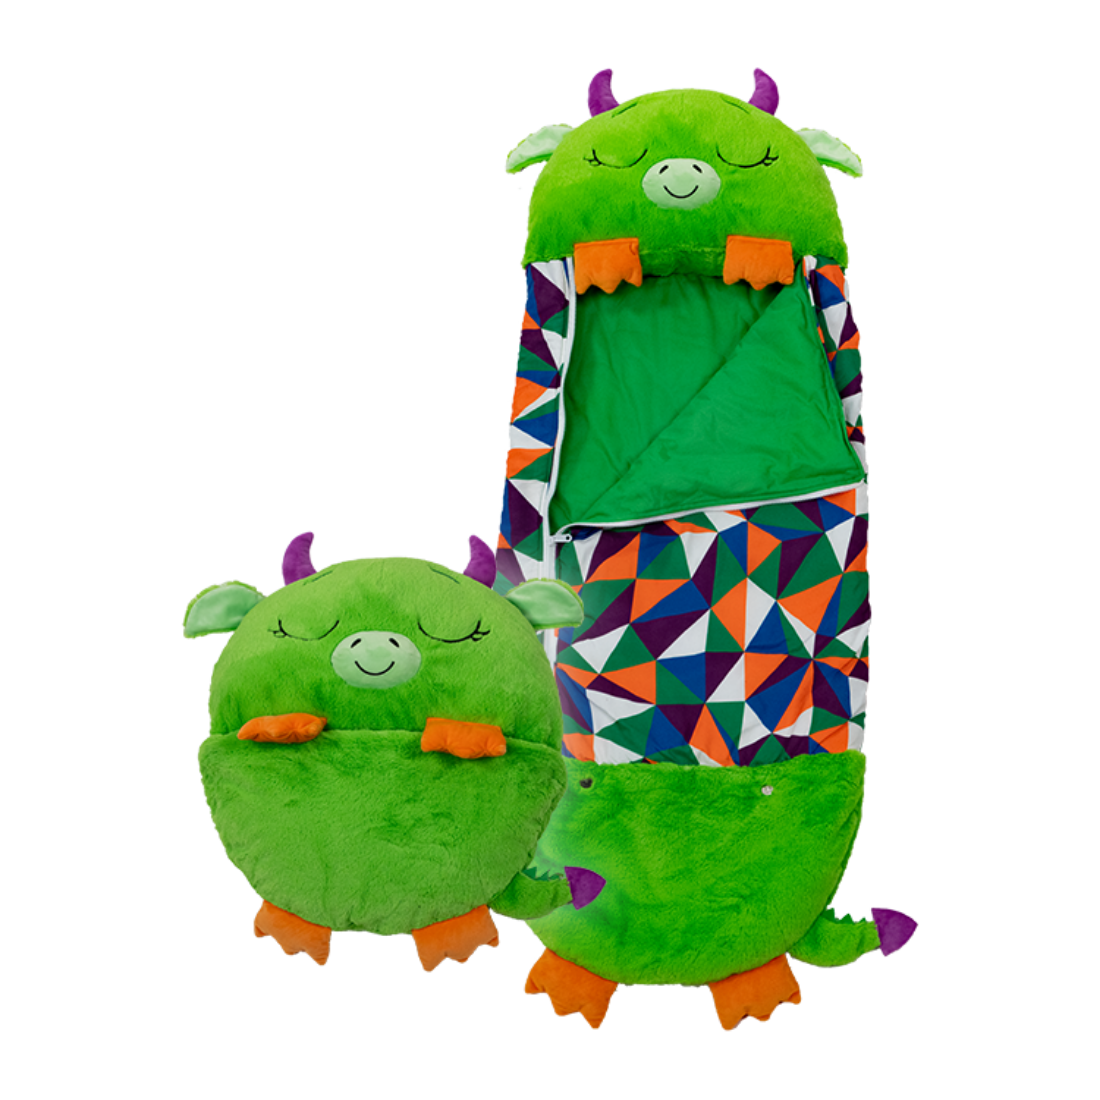 View Happy Nappers Green Dragon Medium Ages 3 To 6 Plush Toy That Opens To A Fun Sleeping Bag High Street TV information